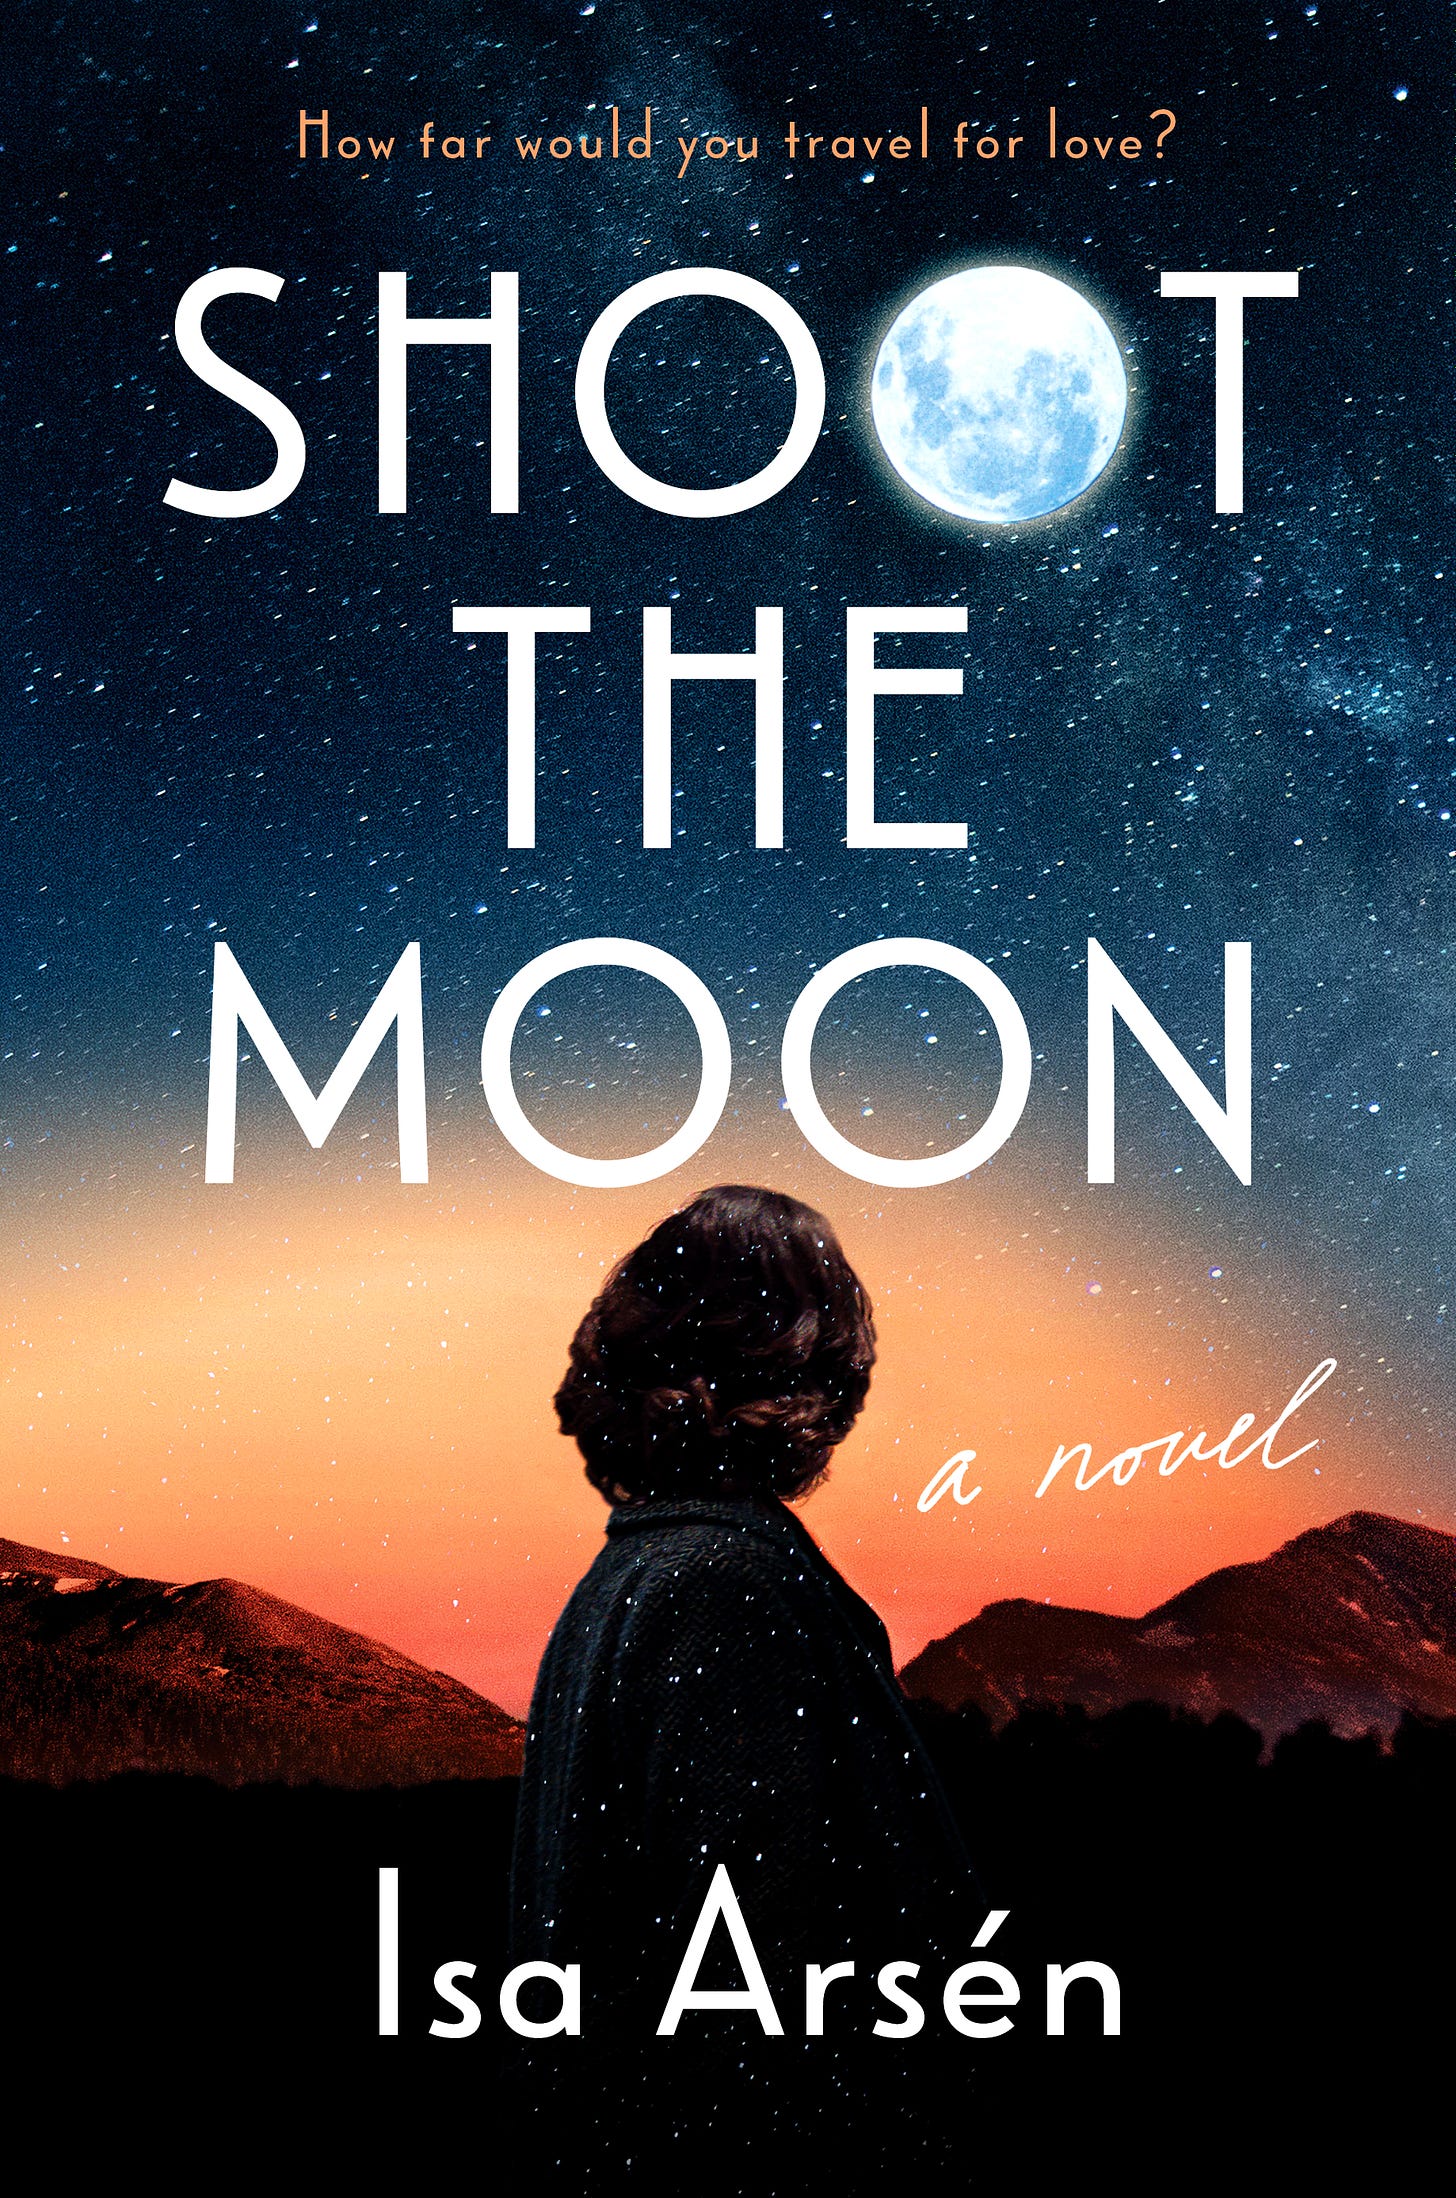 The cover of SHOOT THE MOON, a novel by Isa Arsen. A young woman with short hair looks up at the moon (in one of the O's in the title) above a New Mexico mountain range.